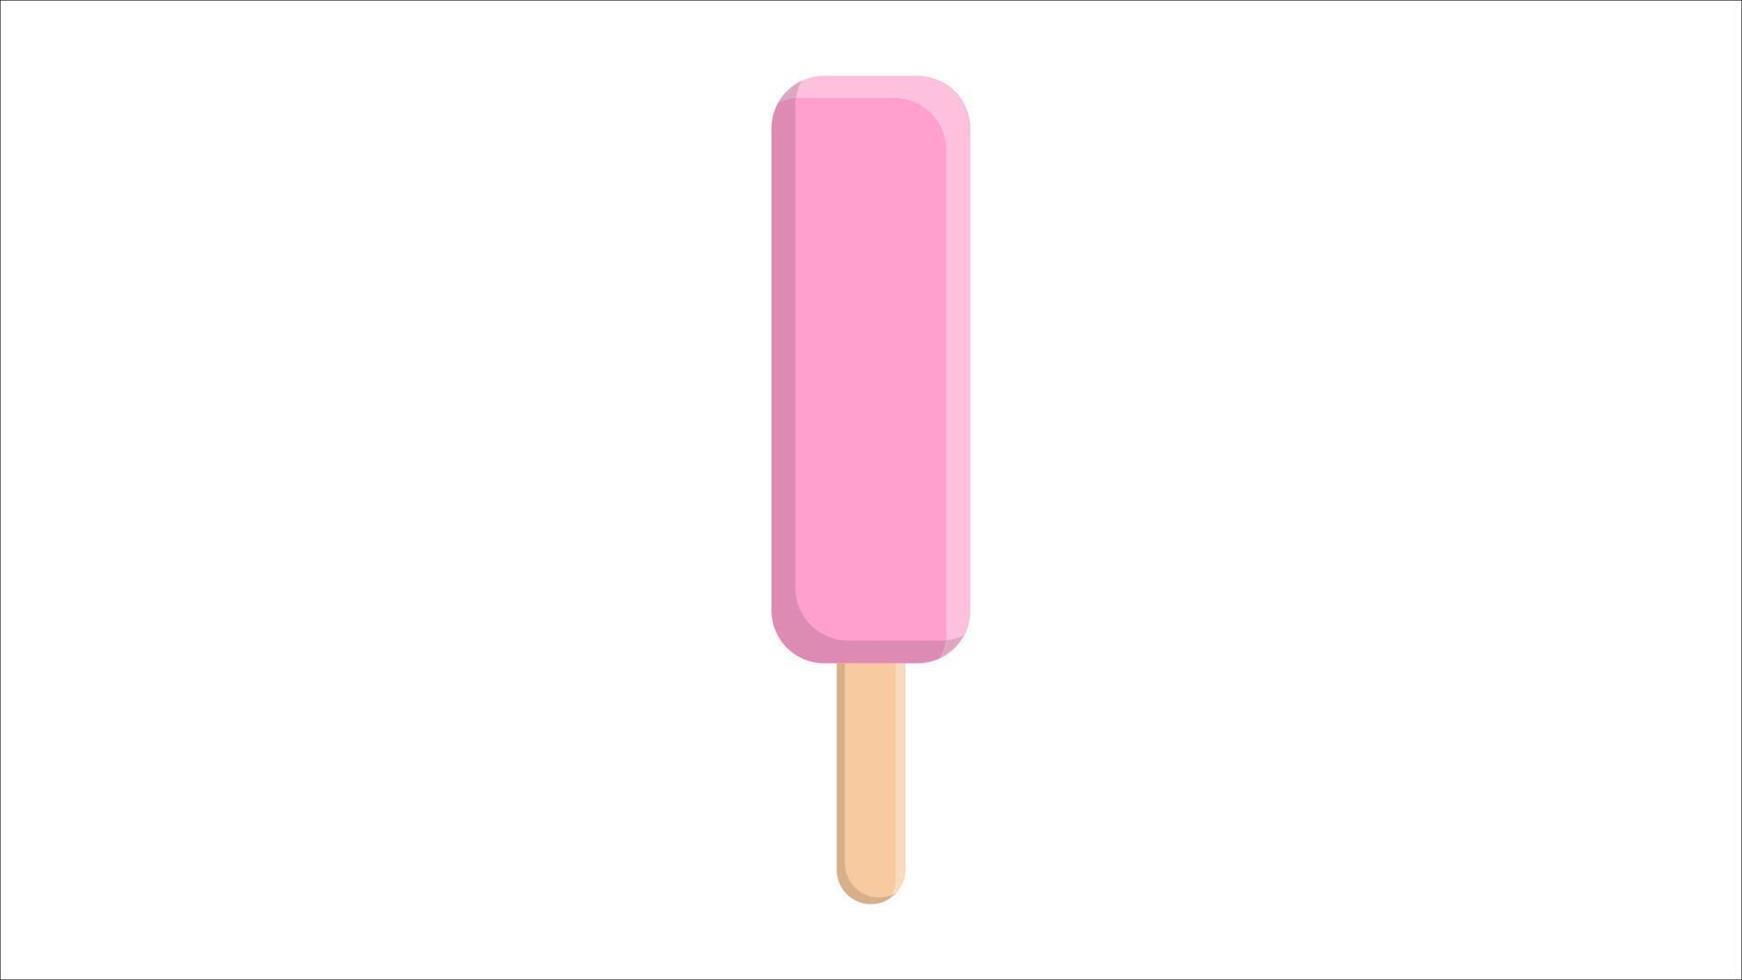 Ice cream in pink glaze on a wooden stick flat isolated vector